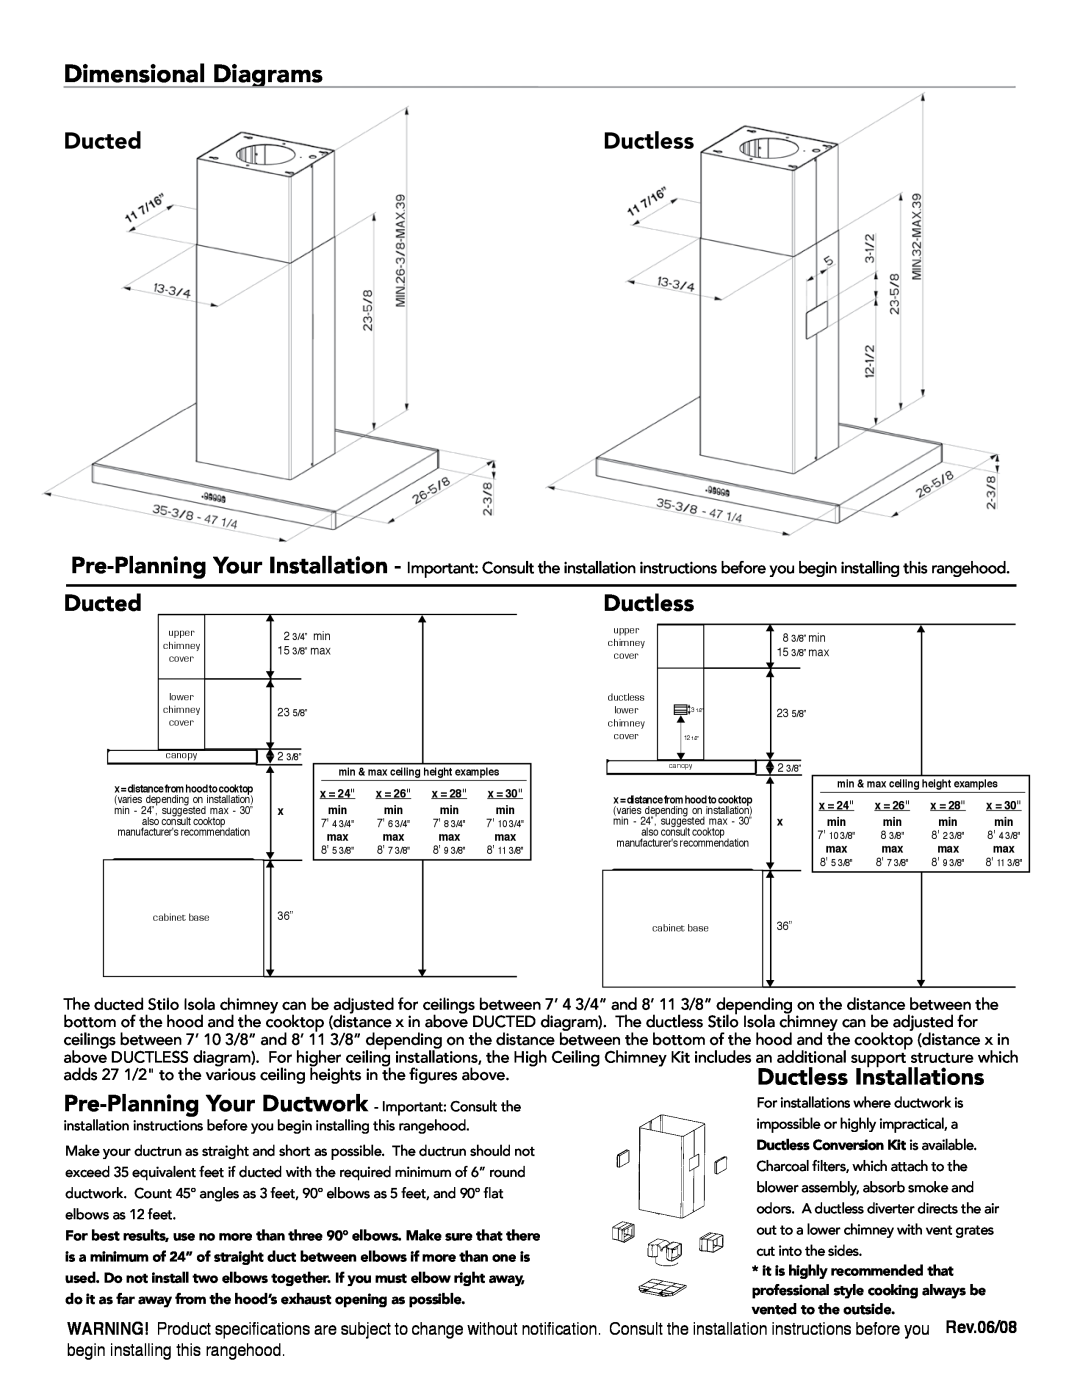 Faber 630006457, 630006456 manual Dimensional Diagrams, Ducted, Ductless Installations, Rev.06/08 